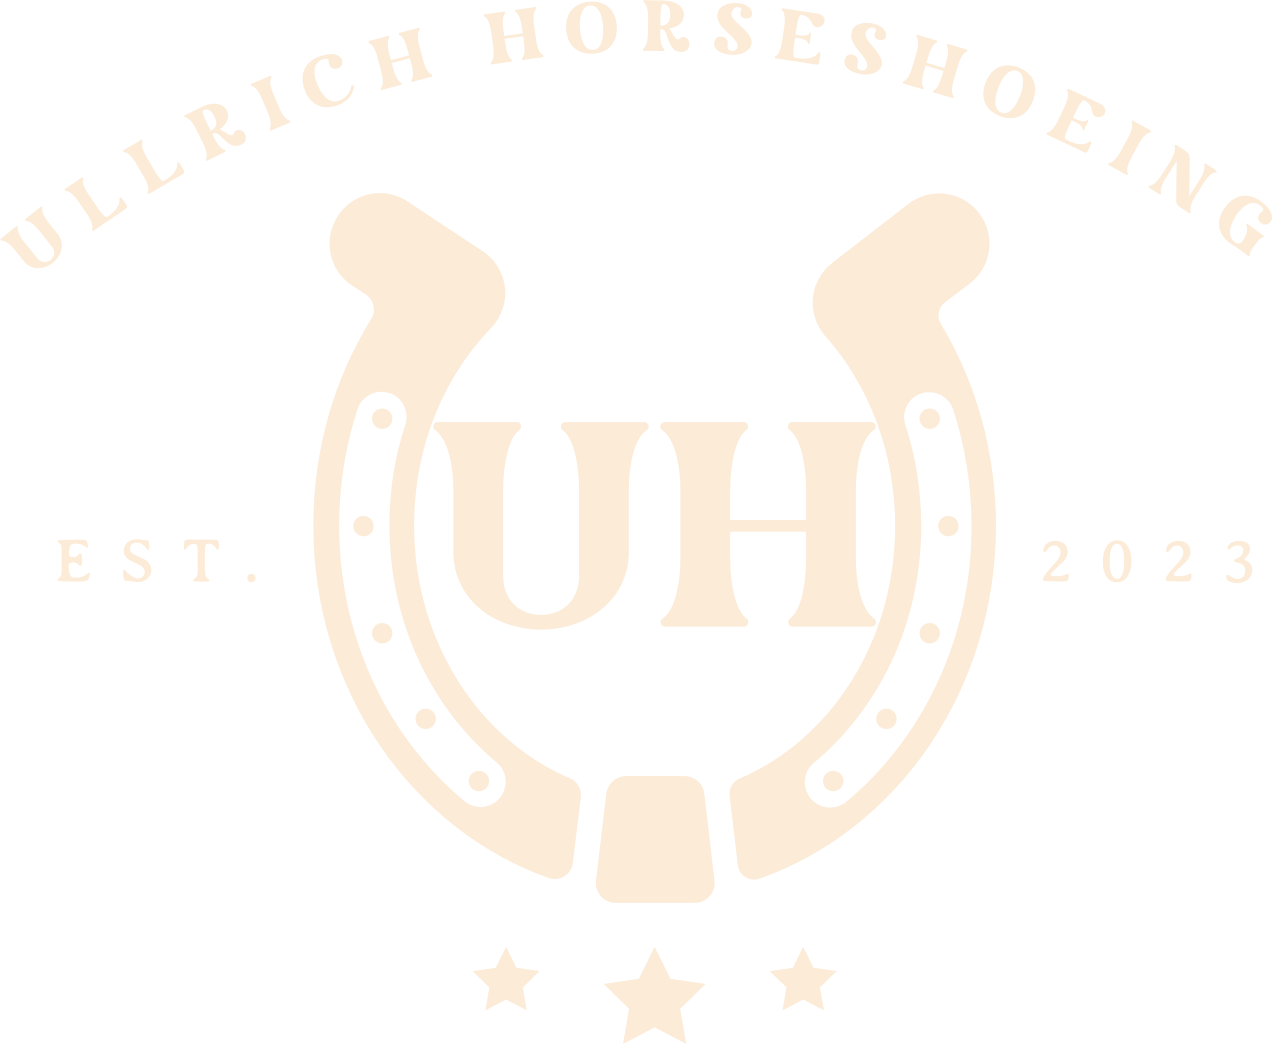 ULLRICH HORSESHOEING 's web page